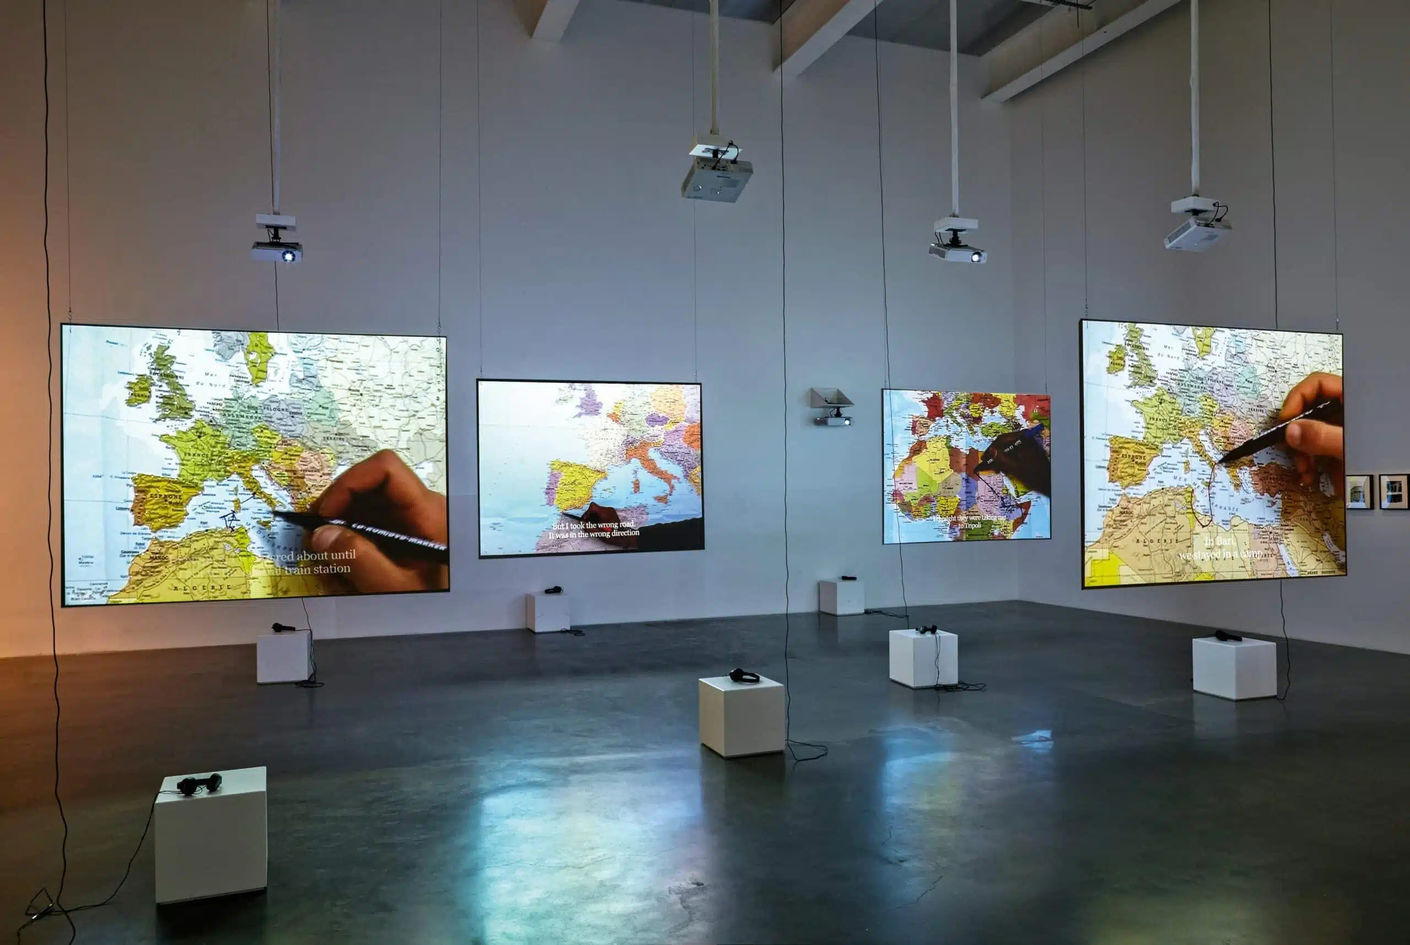 Bouchra Halili. The Mapping Journey Project. Video Installation (2008-2011). New Museum, New York, 2014